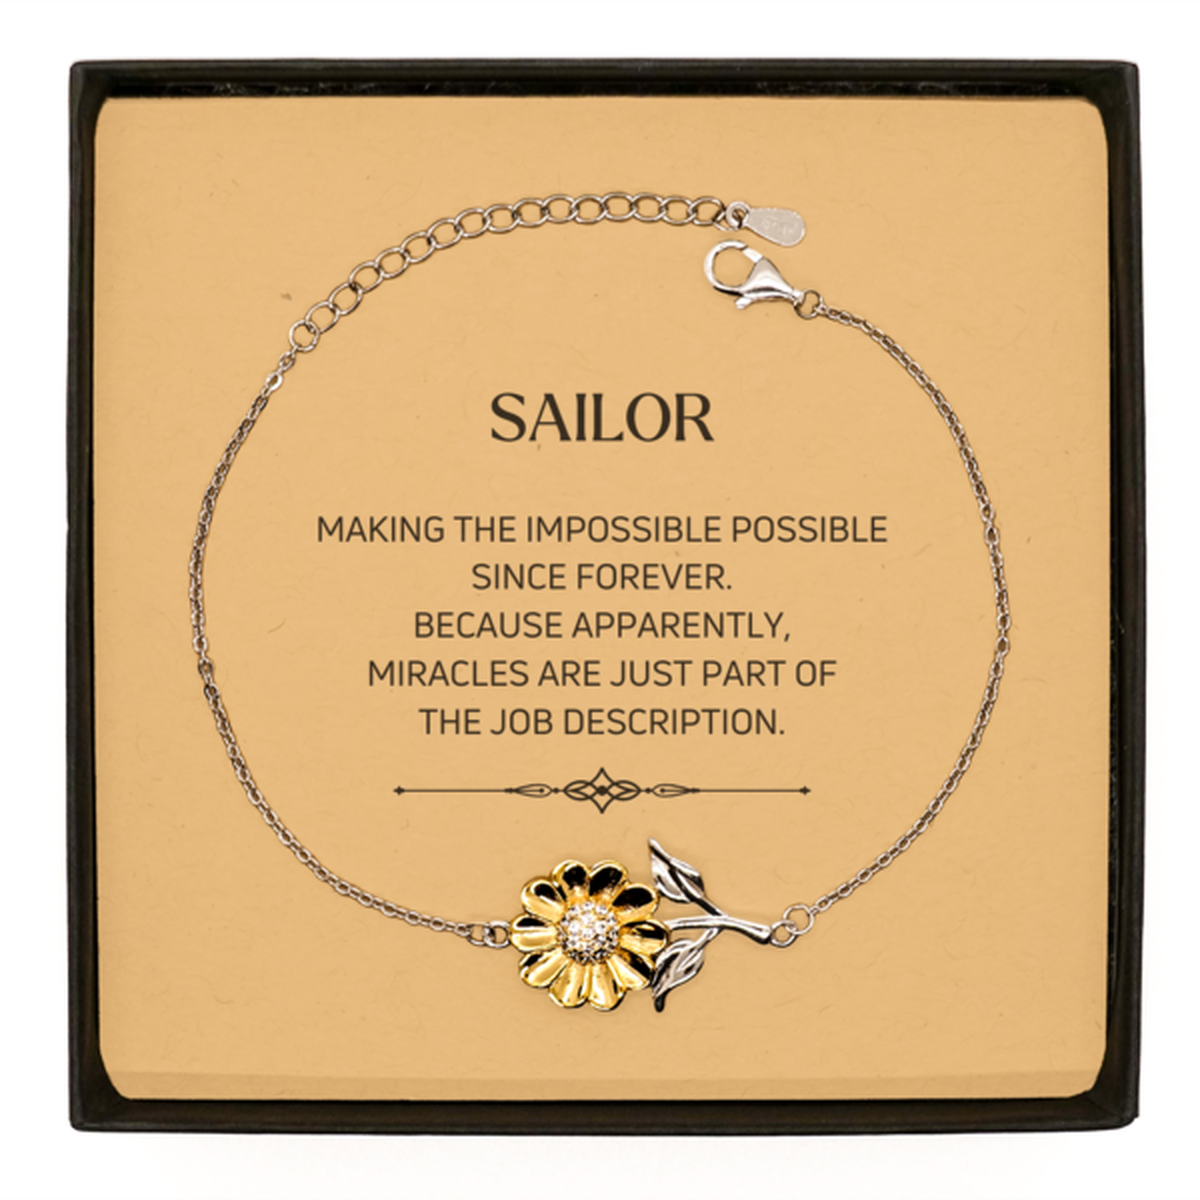 Funny Sailor Gifts, Miracles are just part of the job description, Inspirational Birthday Sunflower Bracelet For Sailor, Men, Women, Coworkers, Friends, Boss